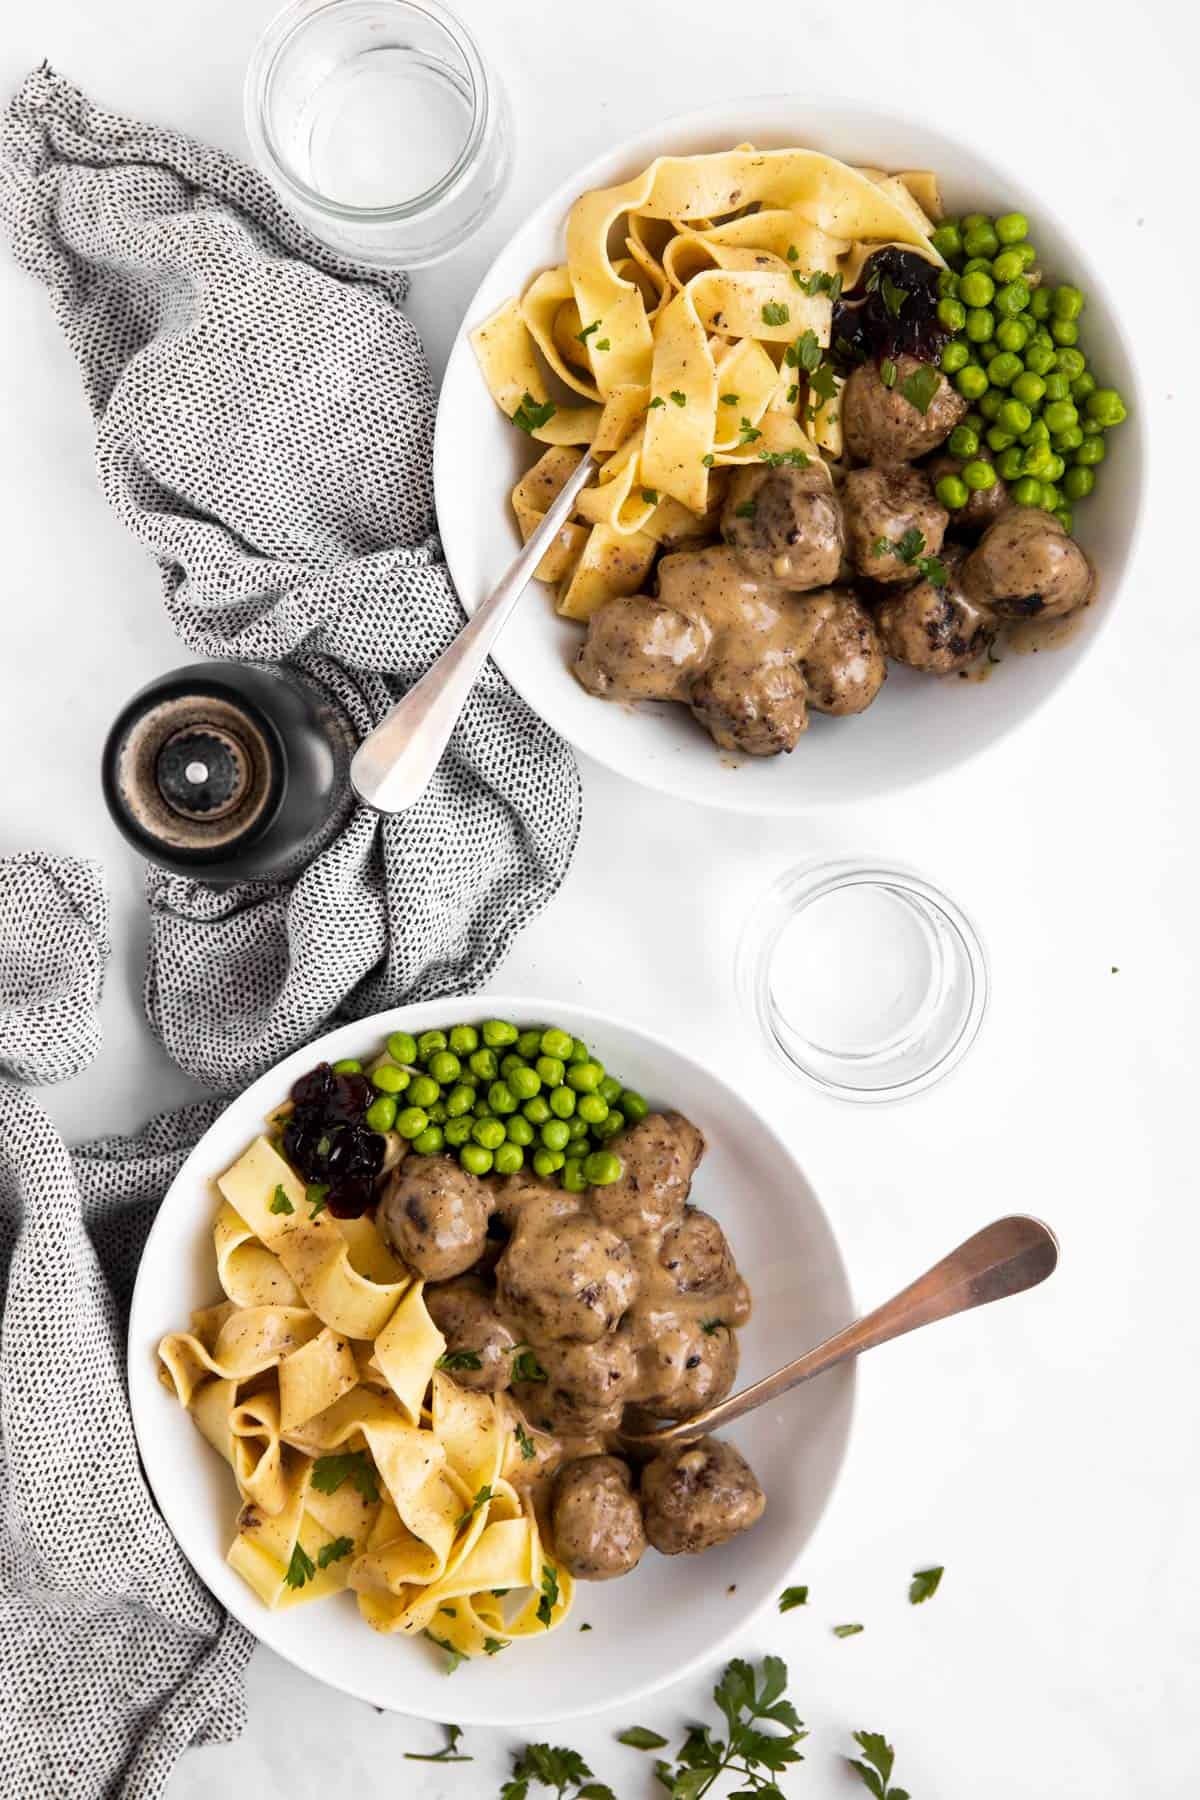 top down view of two plates with noodles, Swedish meatballs and peas